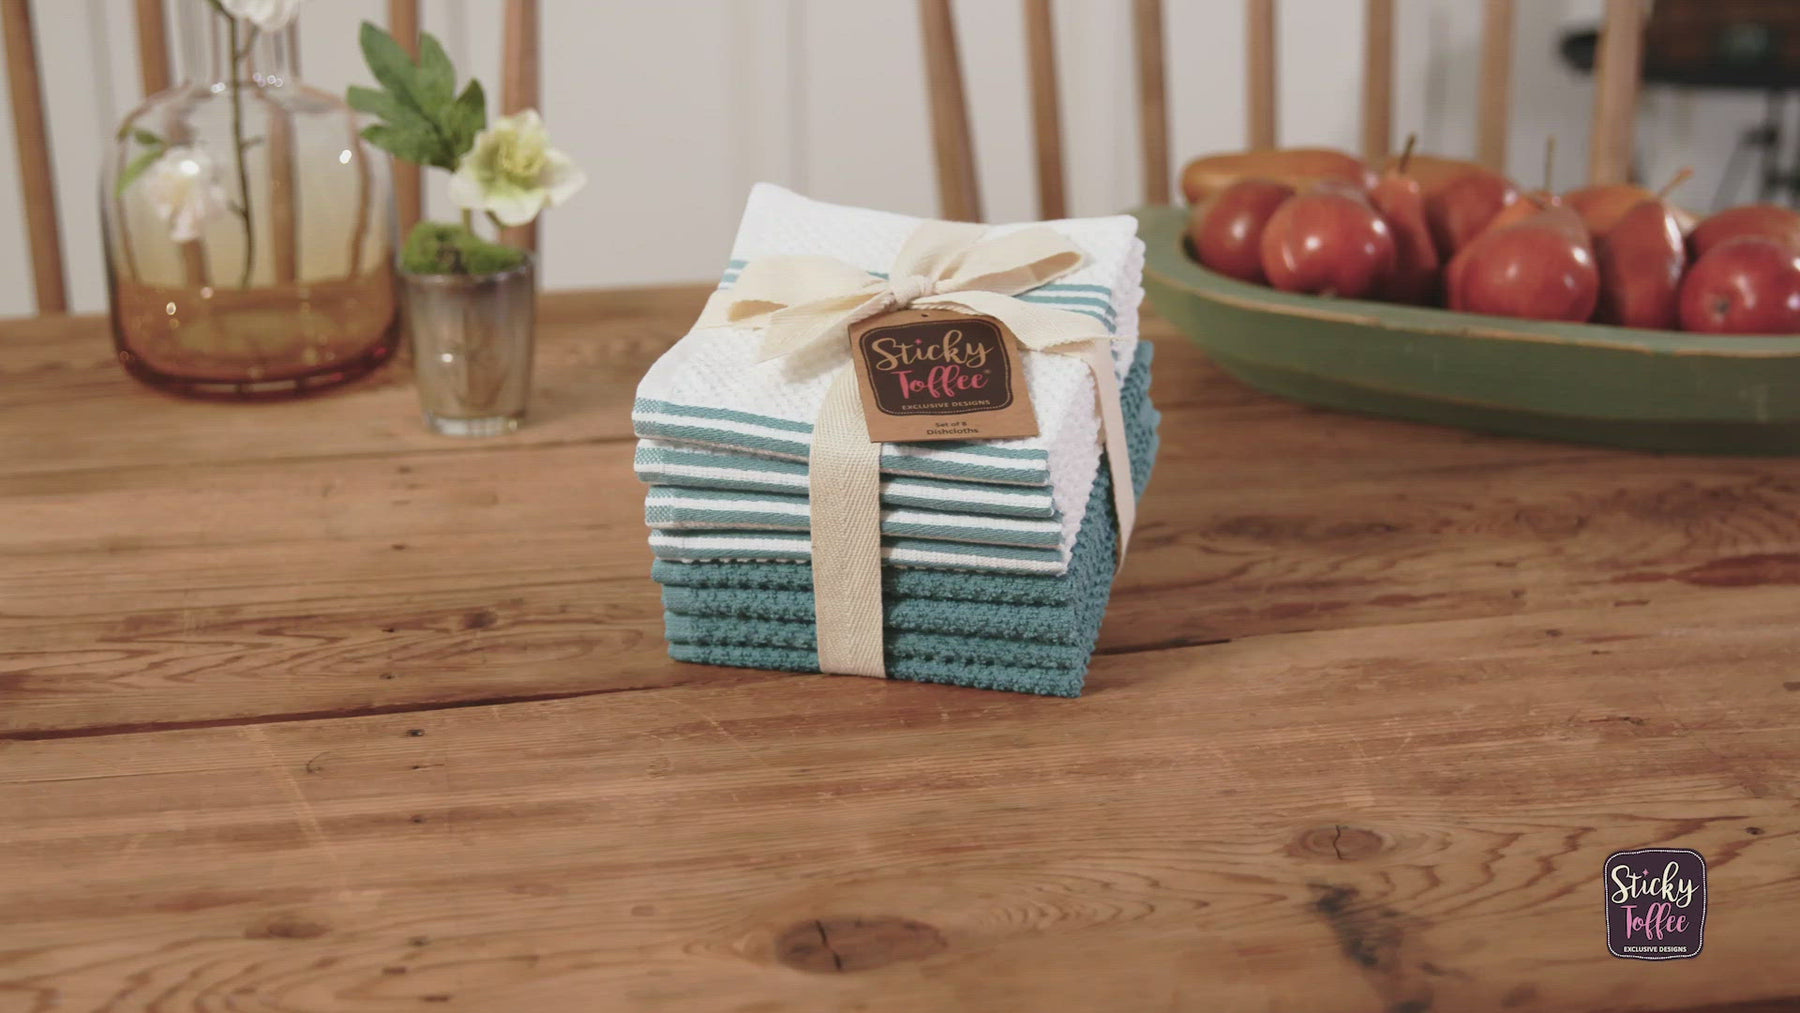 Sticky Toffee Cotton Terry Kitchen Dishcloth Towels, 8 Pack, 12 in x 12 in, Tan Stripe, Size: Dishcloth 12 in x 12 in